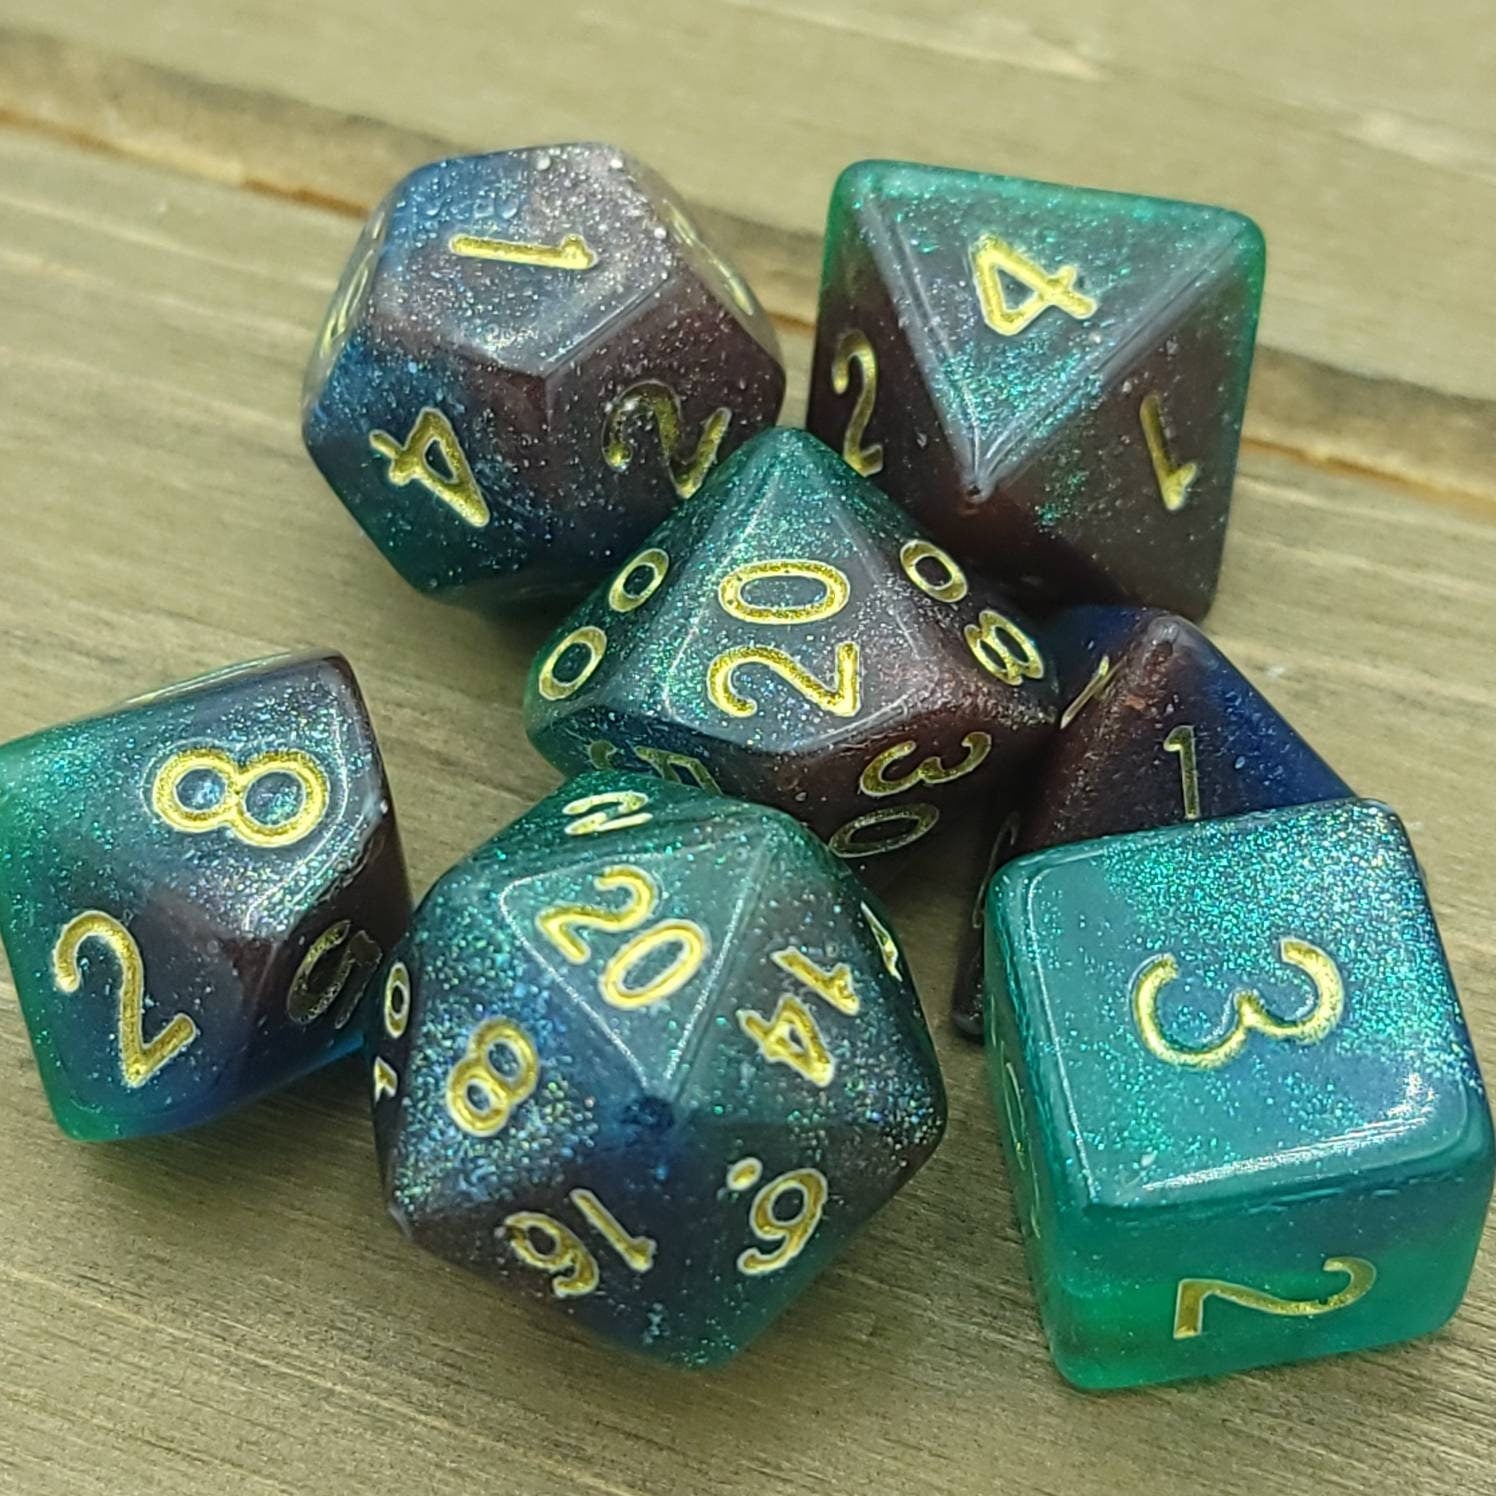 Druidcraft | RPG Dice Set| RPG Dice | Polyhedral Dice Set | Dungeons and Dragons | DnD Dice Set | Gaming Dice Set